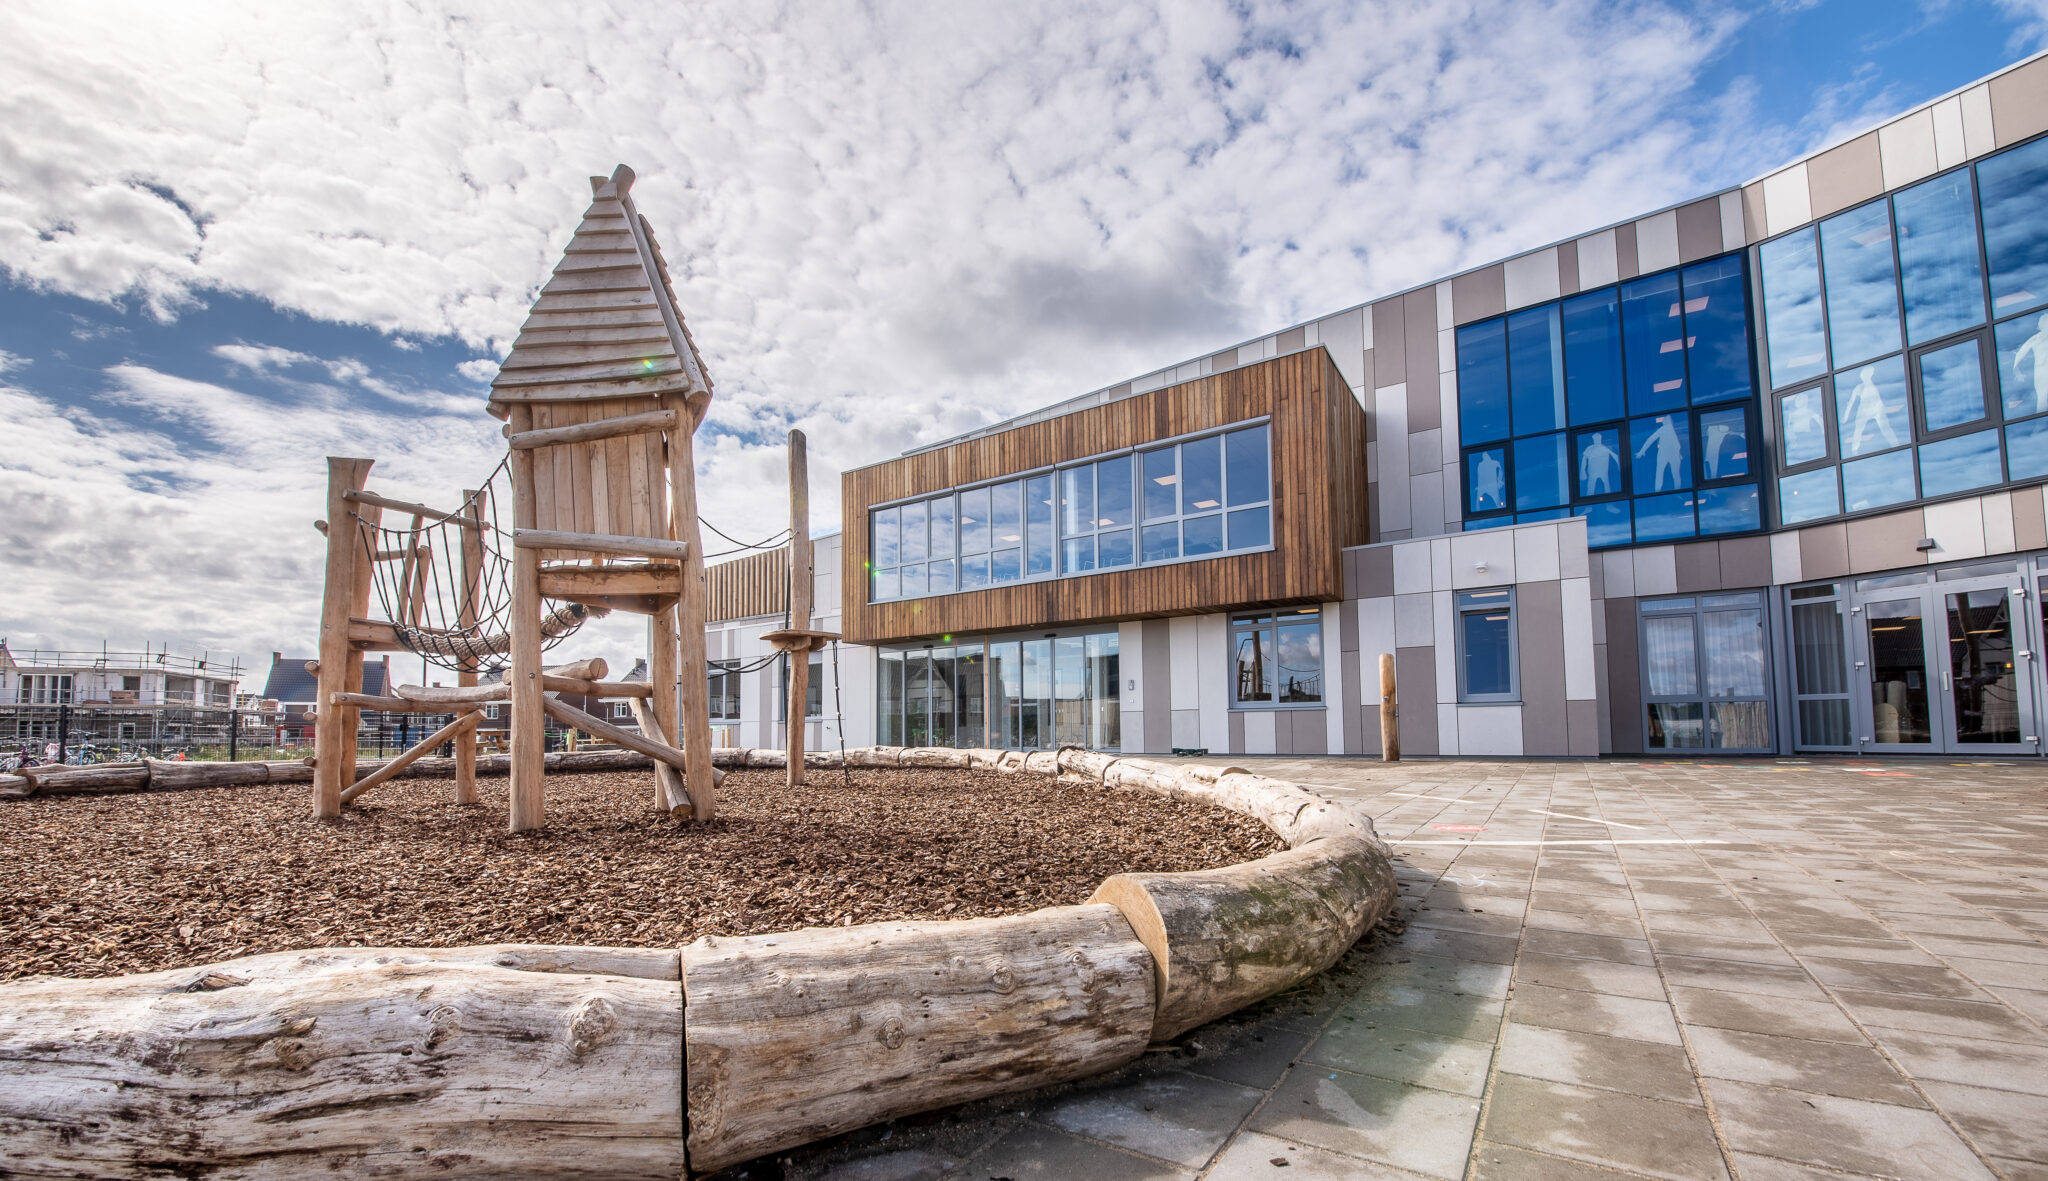 NIJMEGEN / NETHERLANDS-SEPTEMBER 13, 2019: Modern school building for children up to 12 years old. The exterior facades are sleek in design and executed in light colors. The children's playground is visible in the foreground